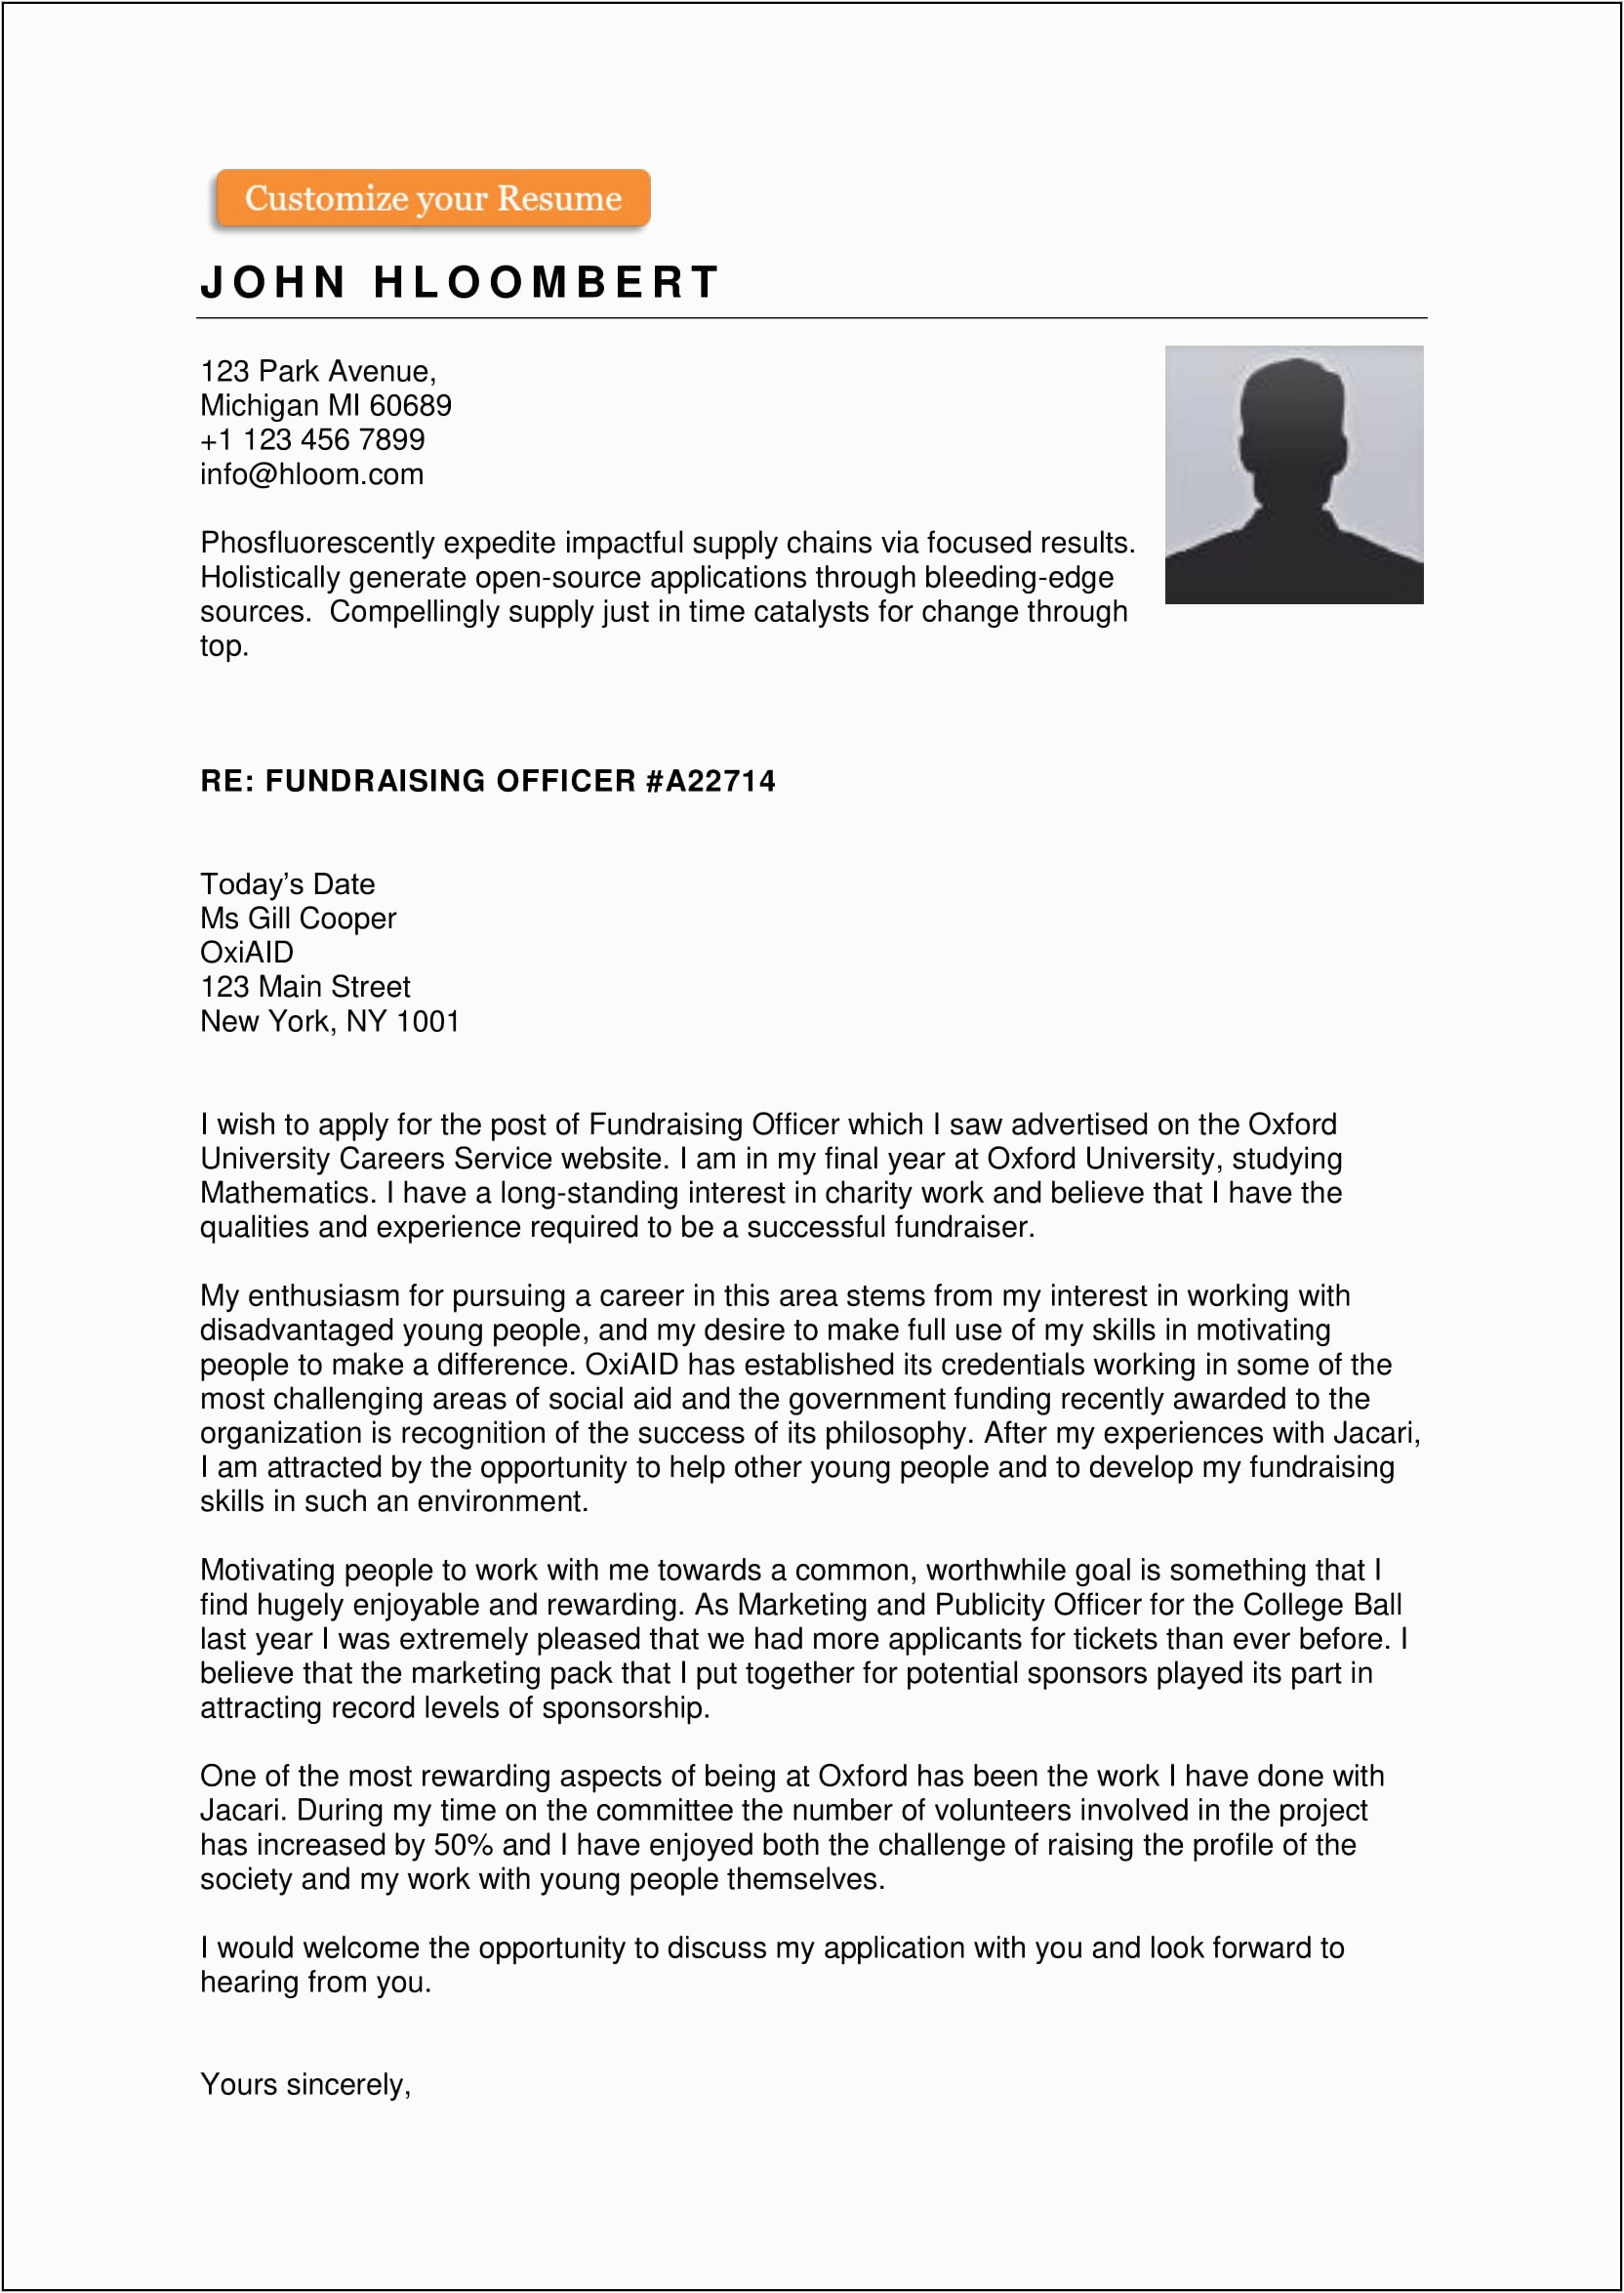 Sample Resume Cover Letter and References Resume Cover Letter Sample Free Download